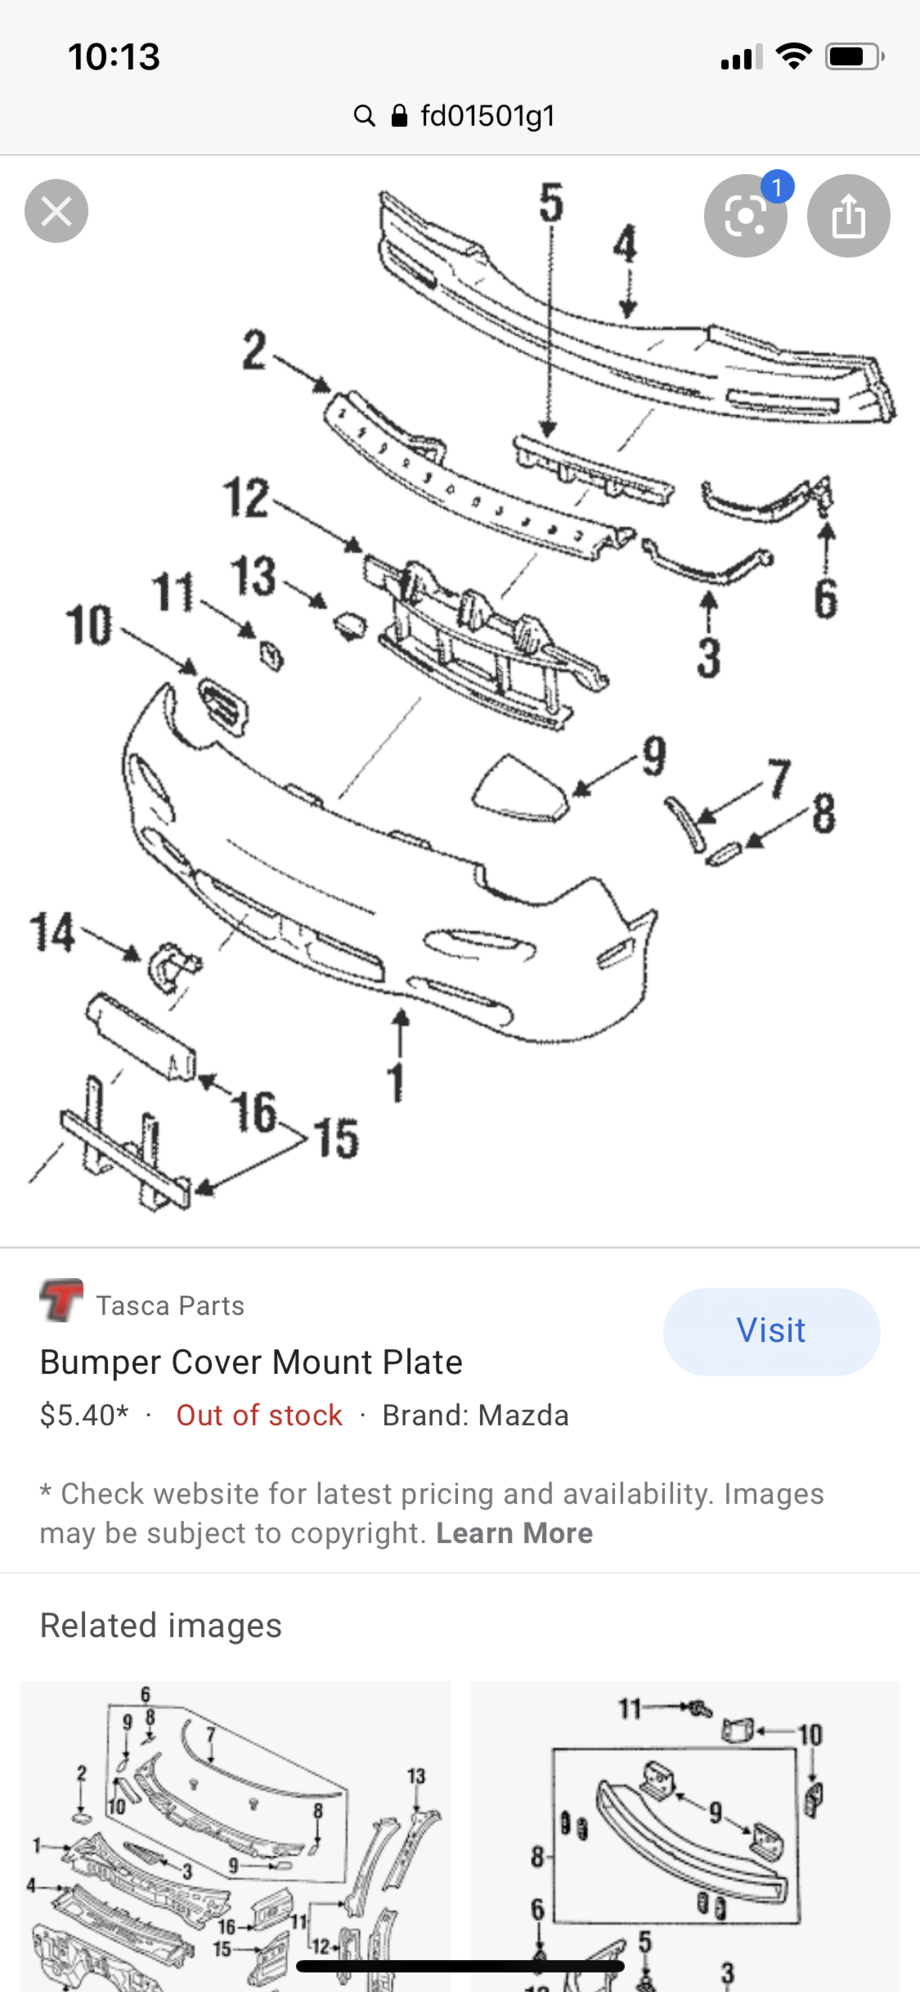 Exterior Body Parts - WTB Front Bumper Brackets/Retainers - New or Used - 1993 to 2002 Mazda RX-7 - Centreville, MD 21617, United States